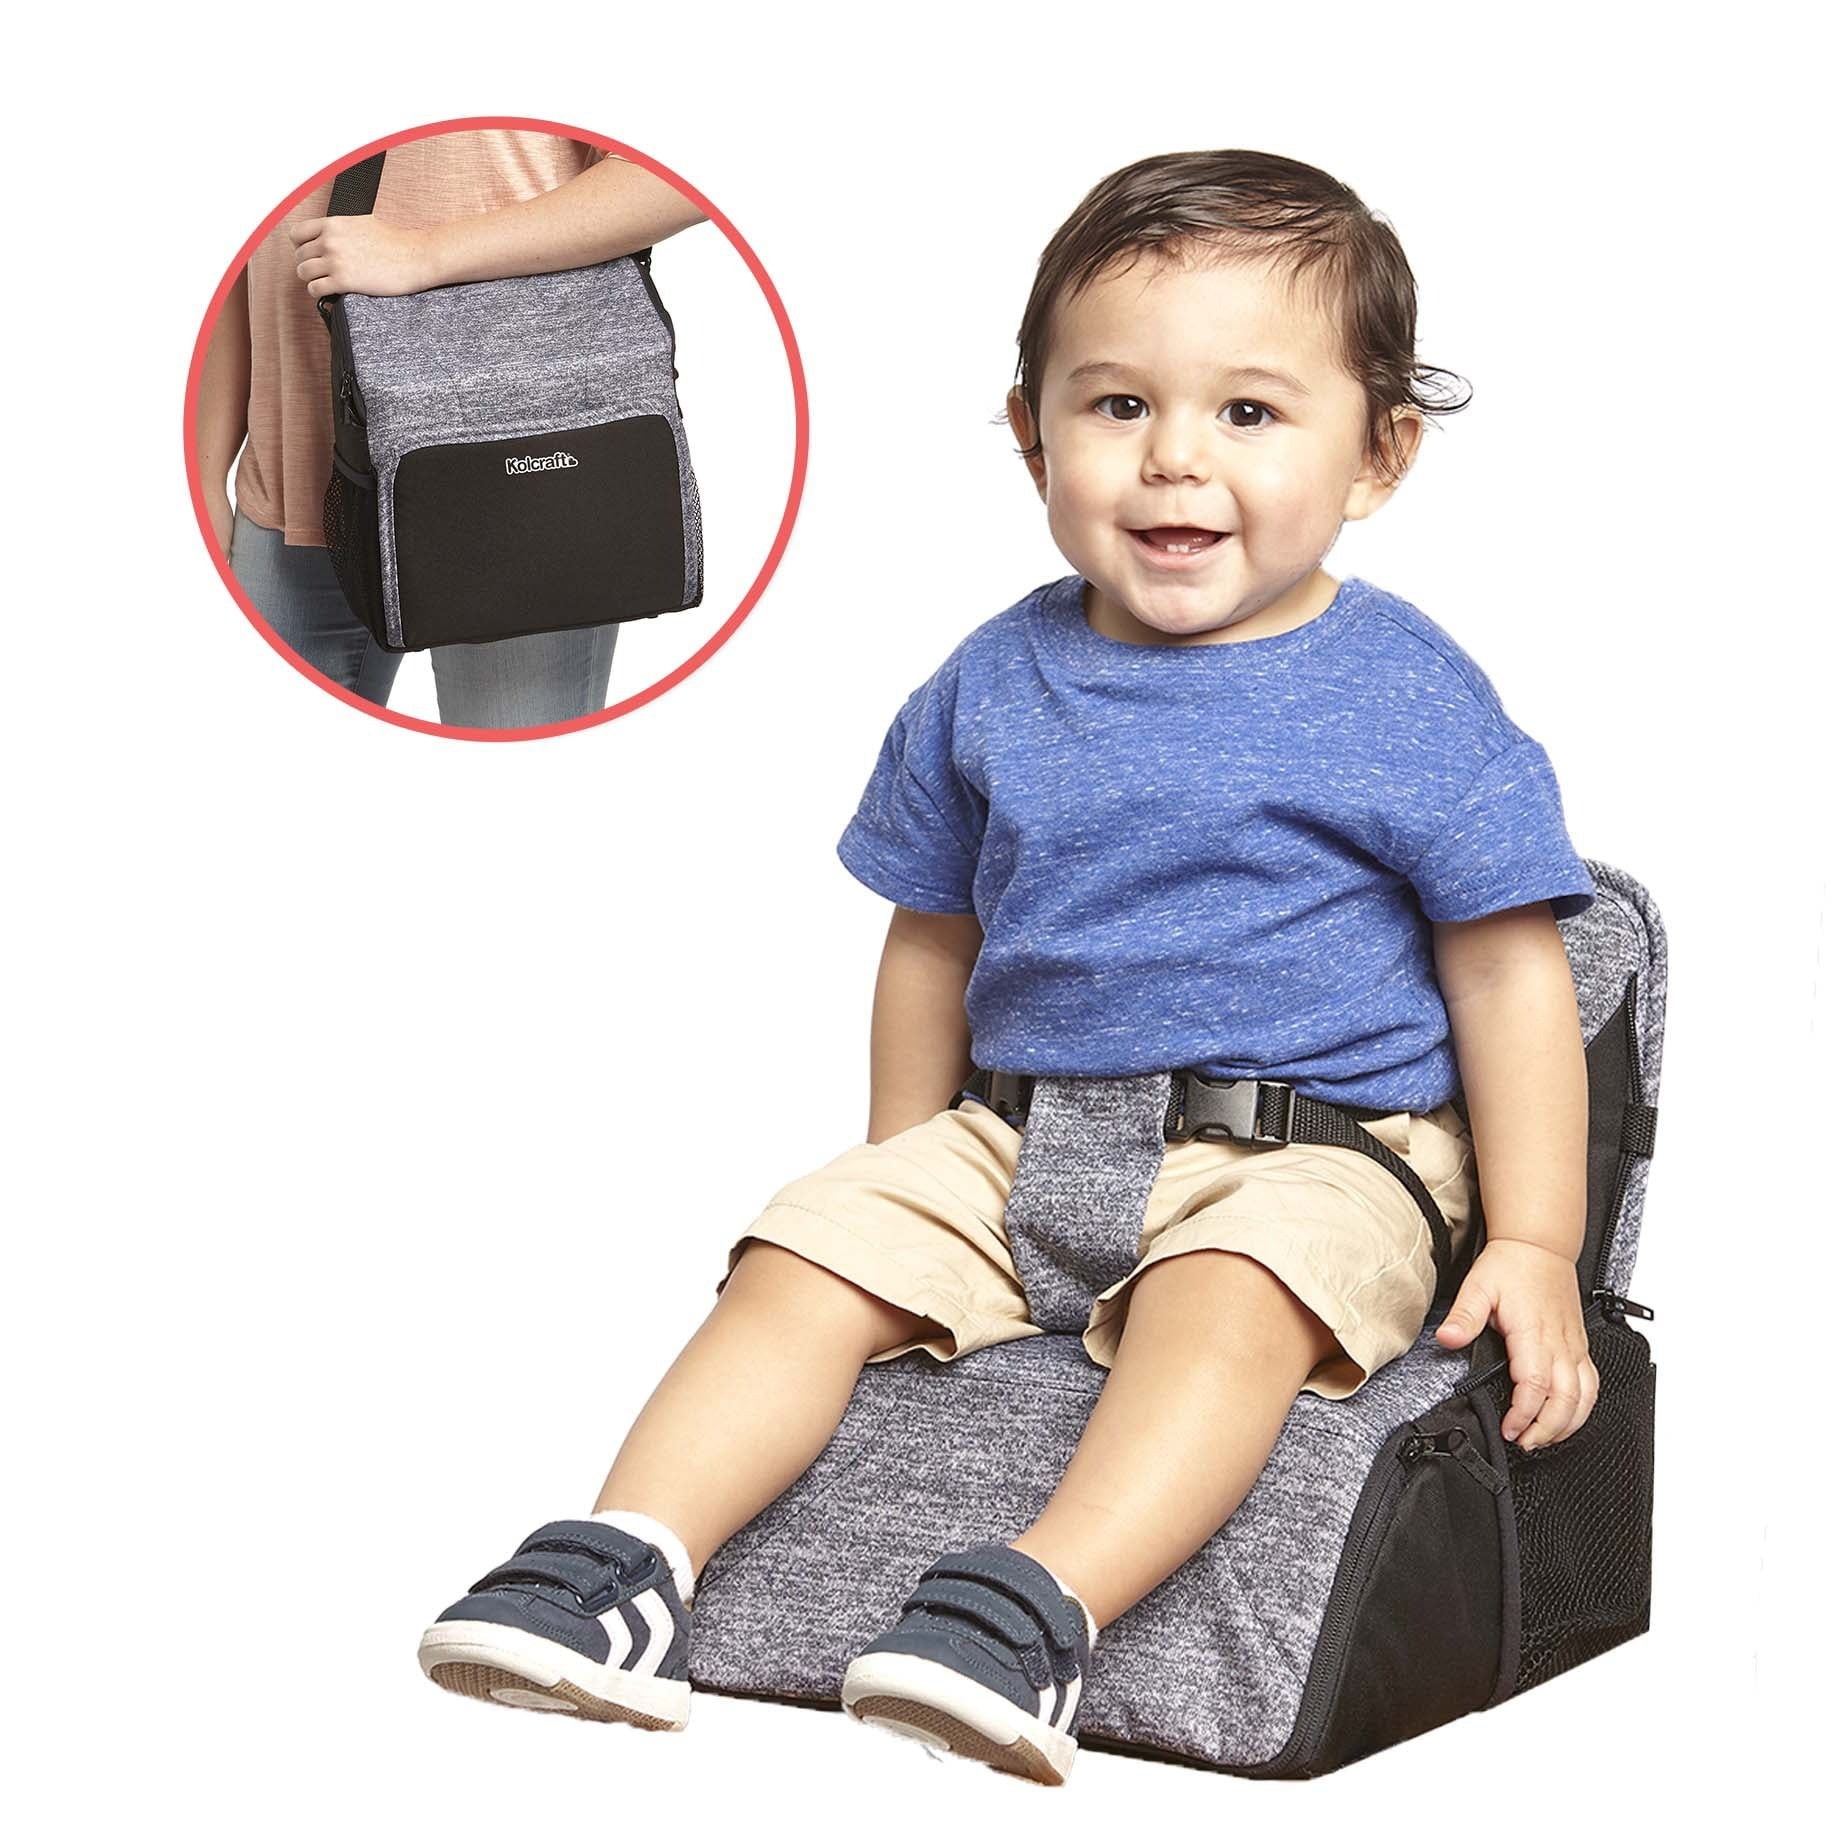 A child sitting and strapped into the booster seat along with a side photo of a person wearing it as a diaper bag.